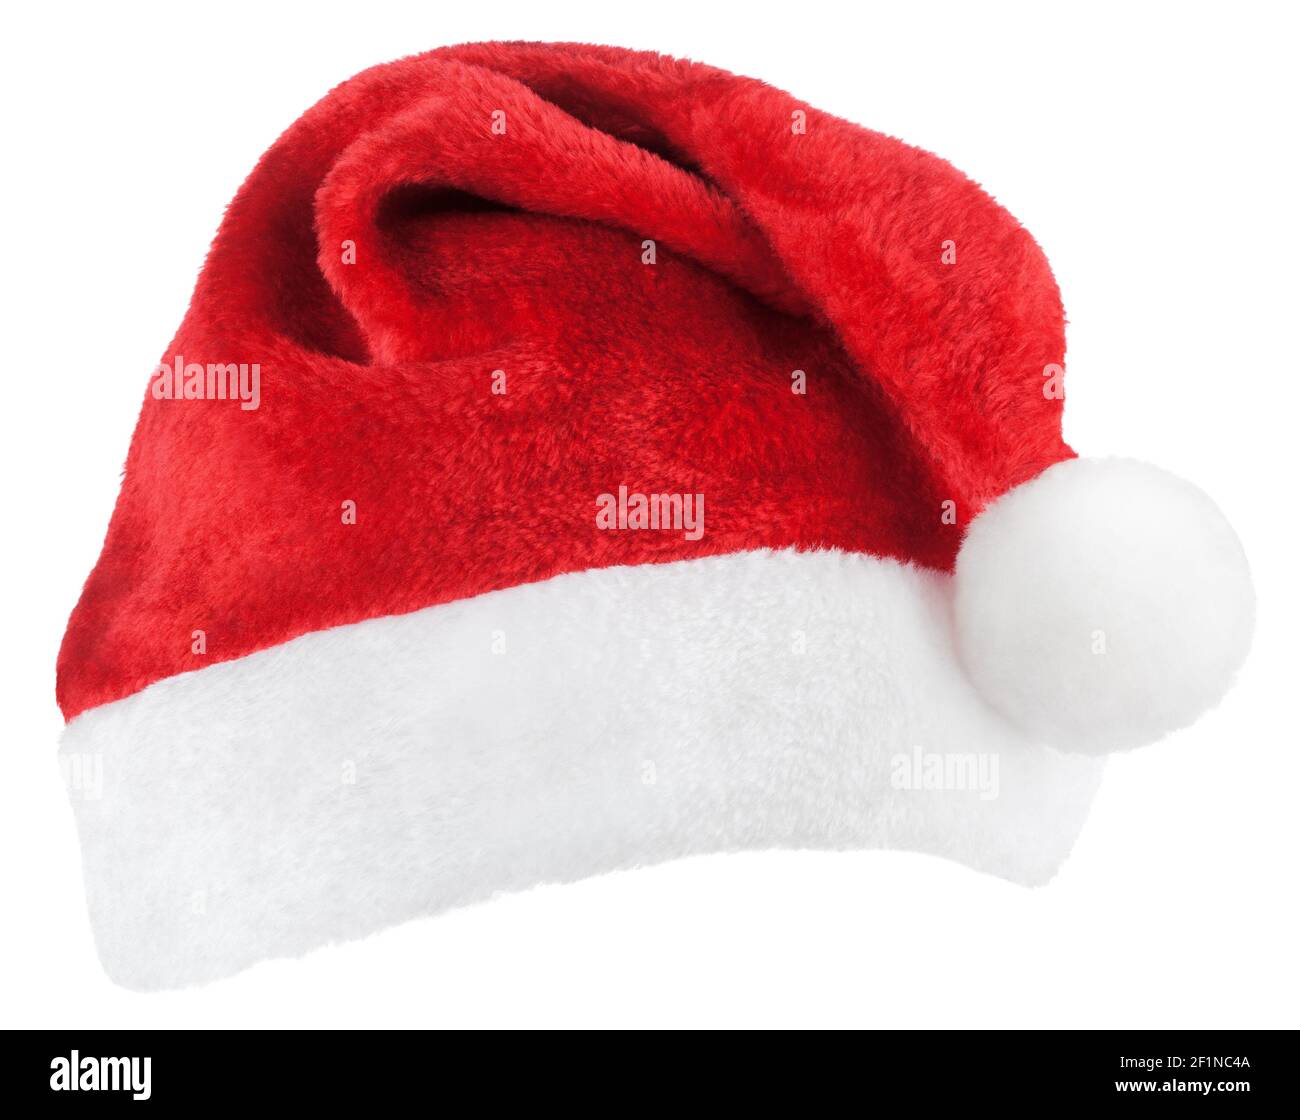 Santa Claus or christmas red hat isolated on white background Stock Photo